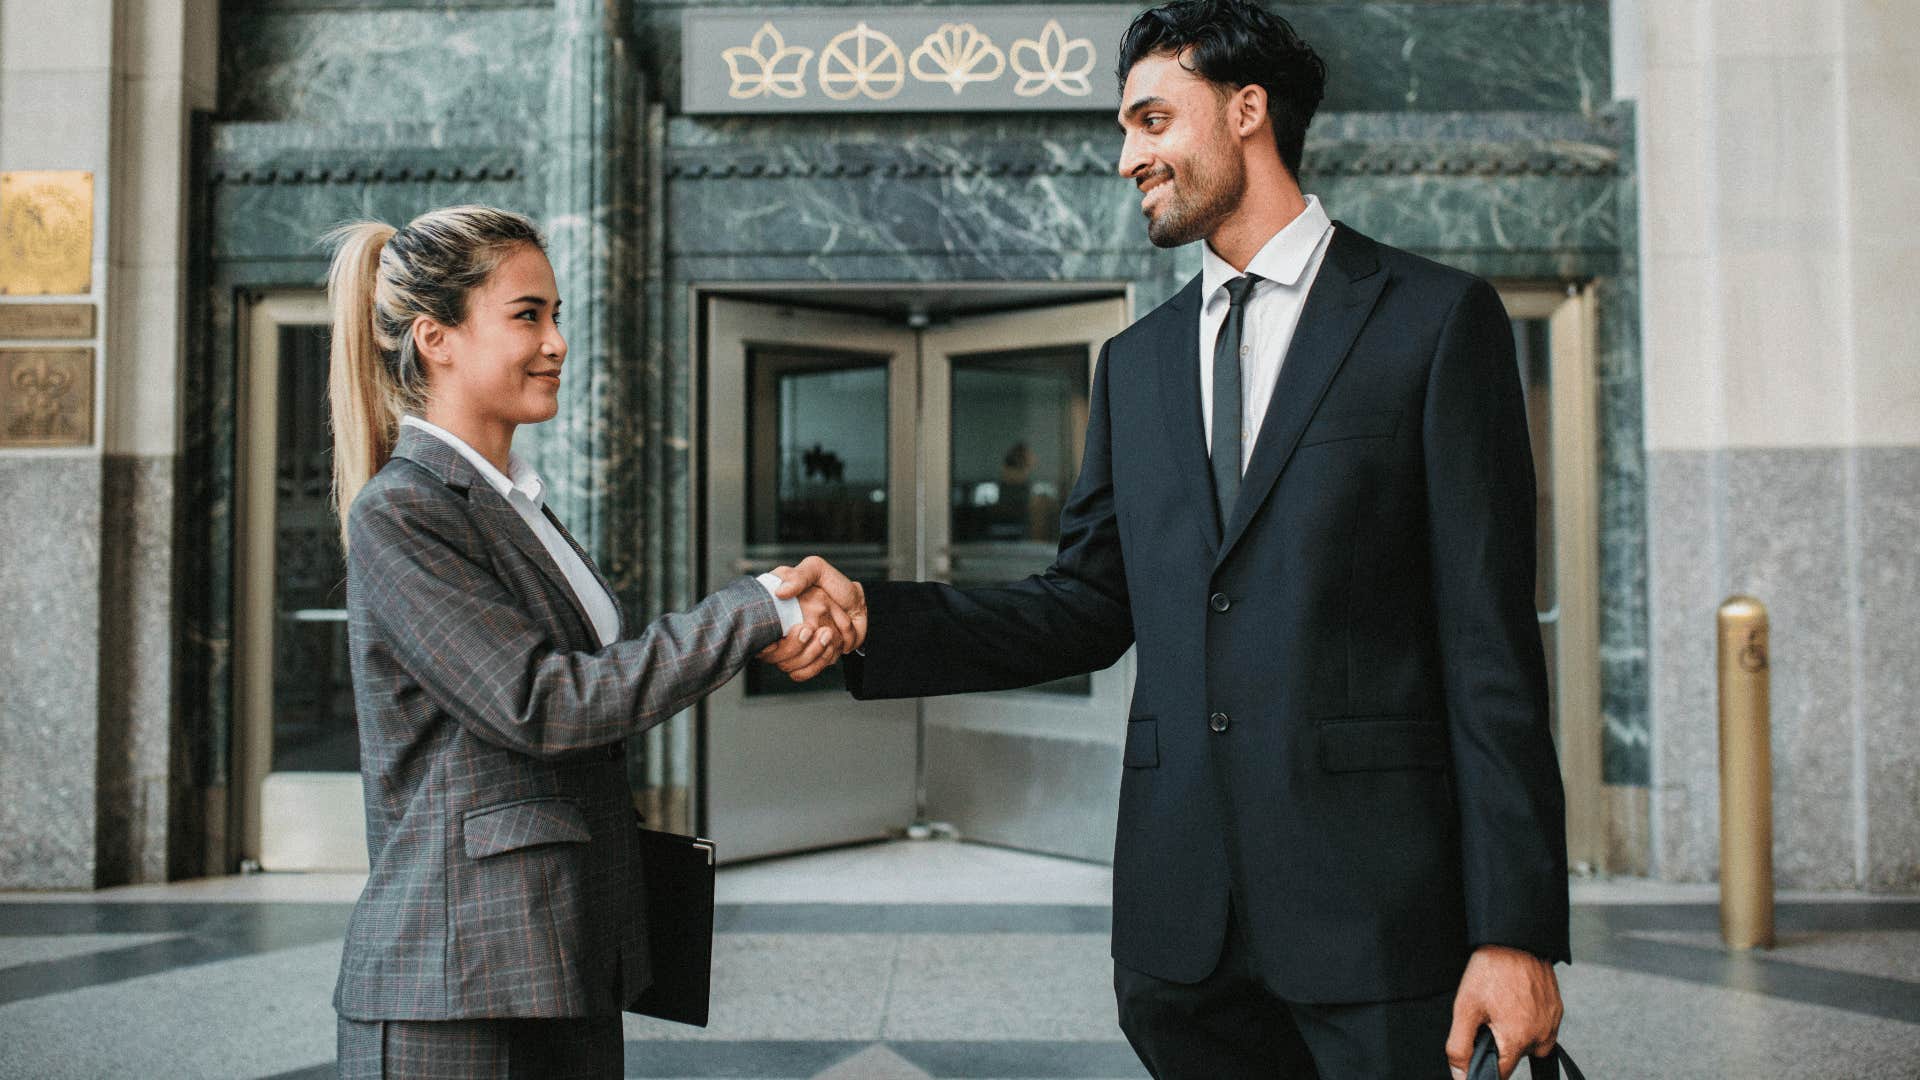 coworkers shaking hands after making decision